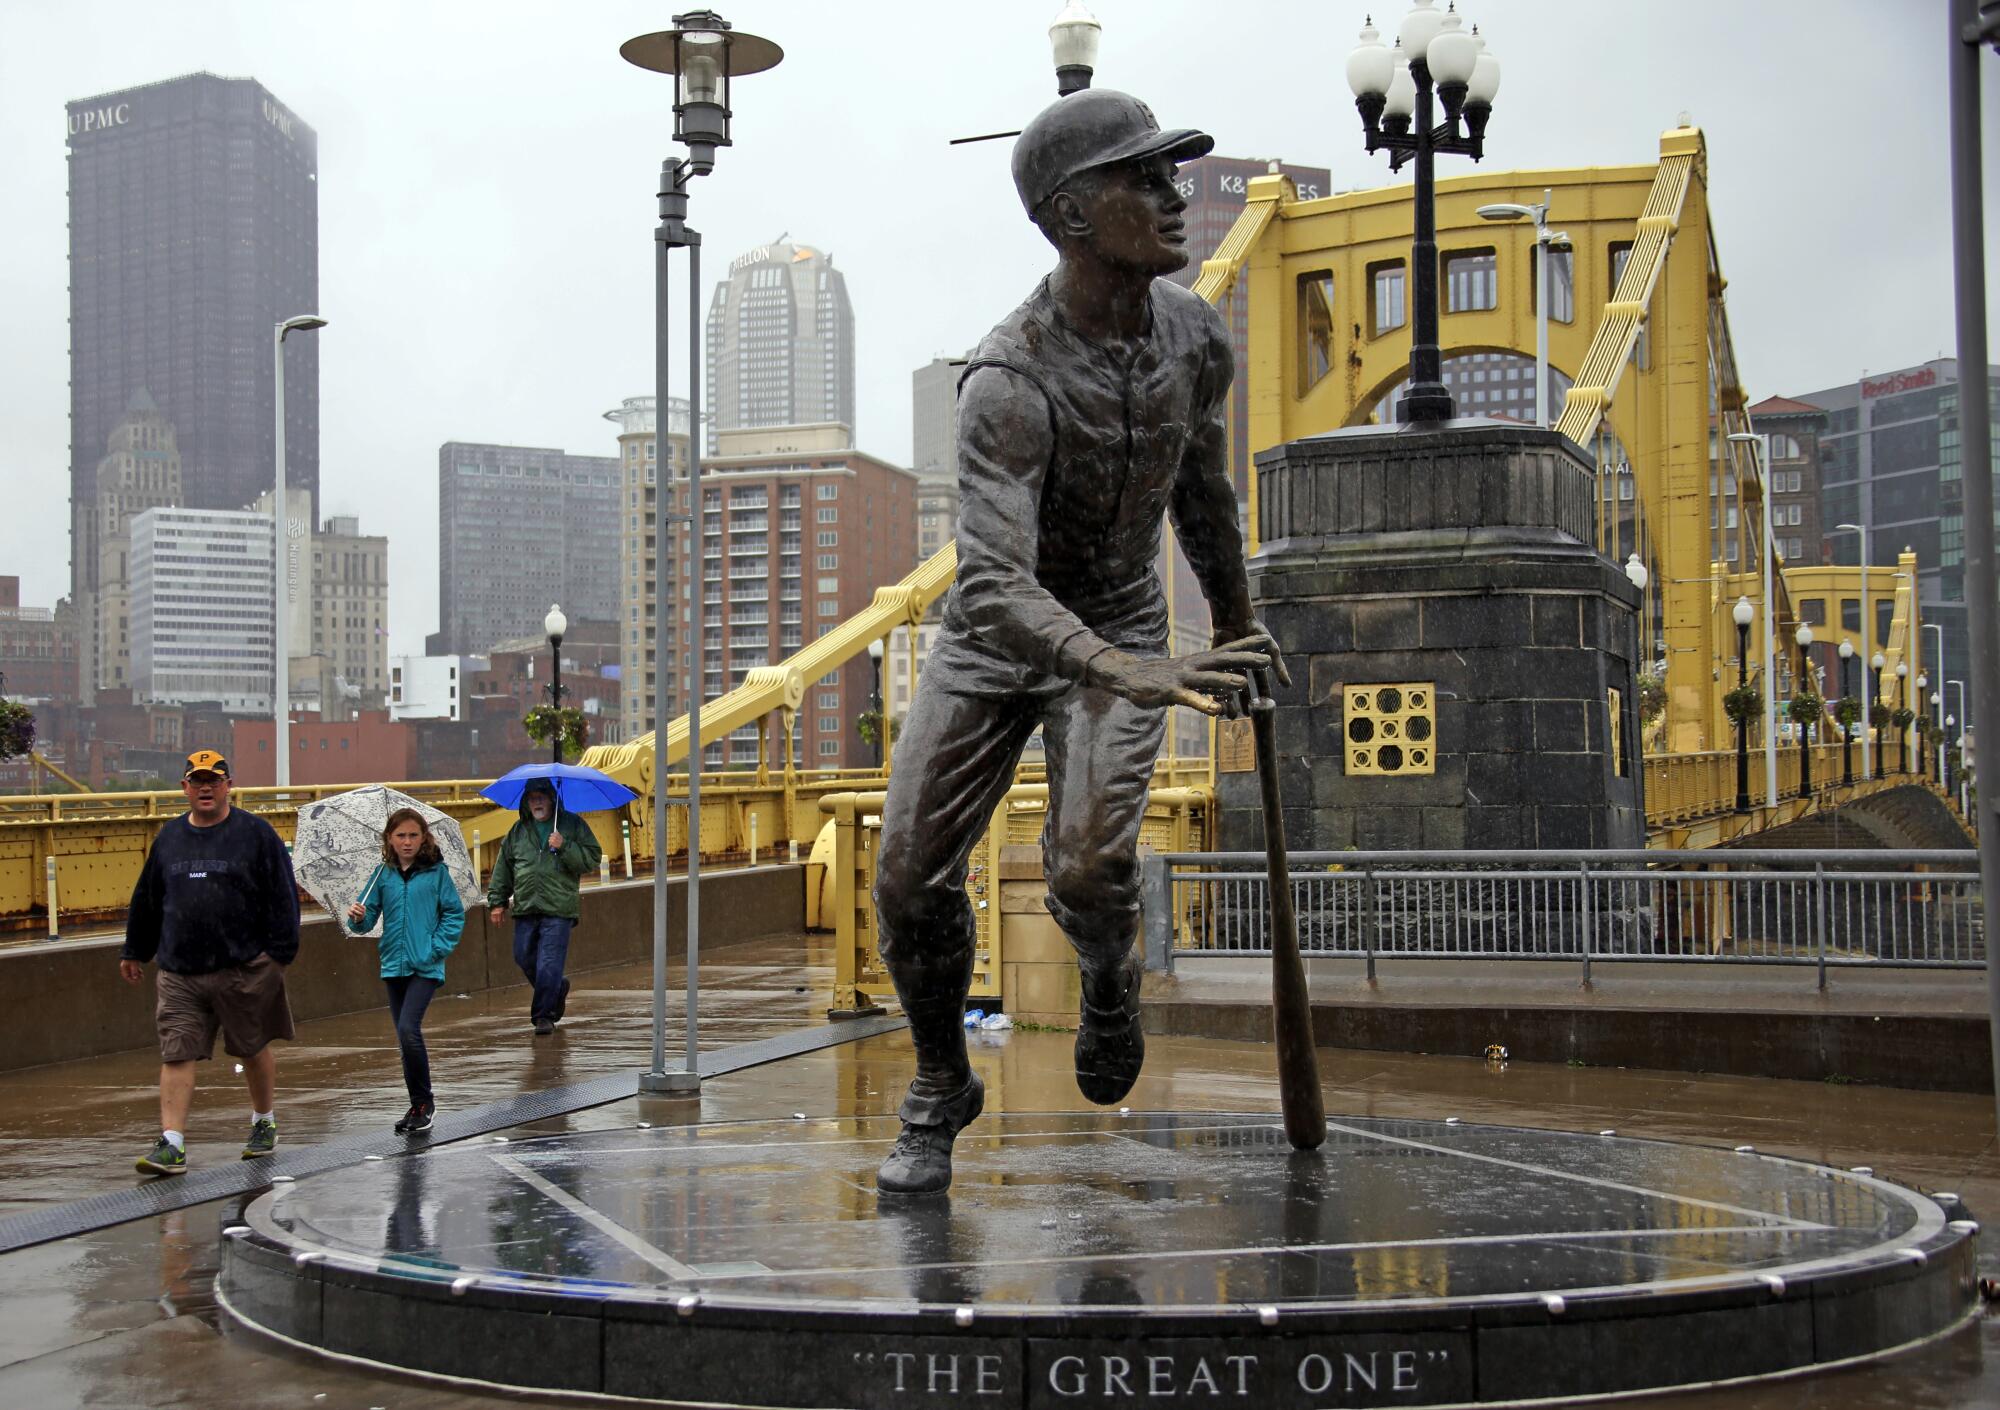 Roberto Clemente as influential as ever 50 years after death - Los